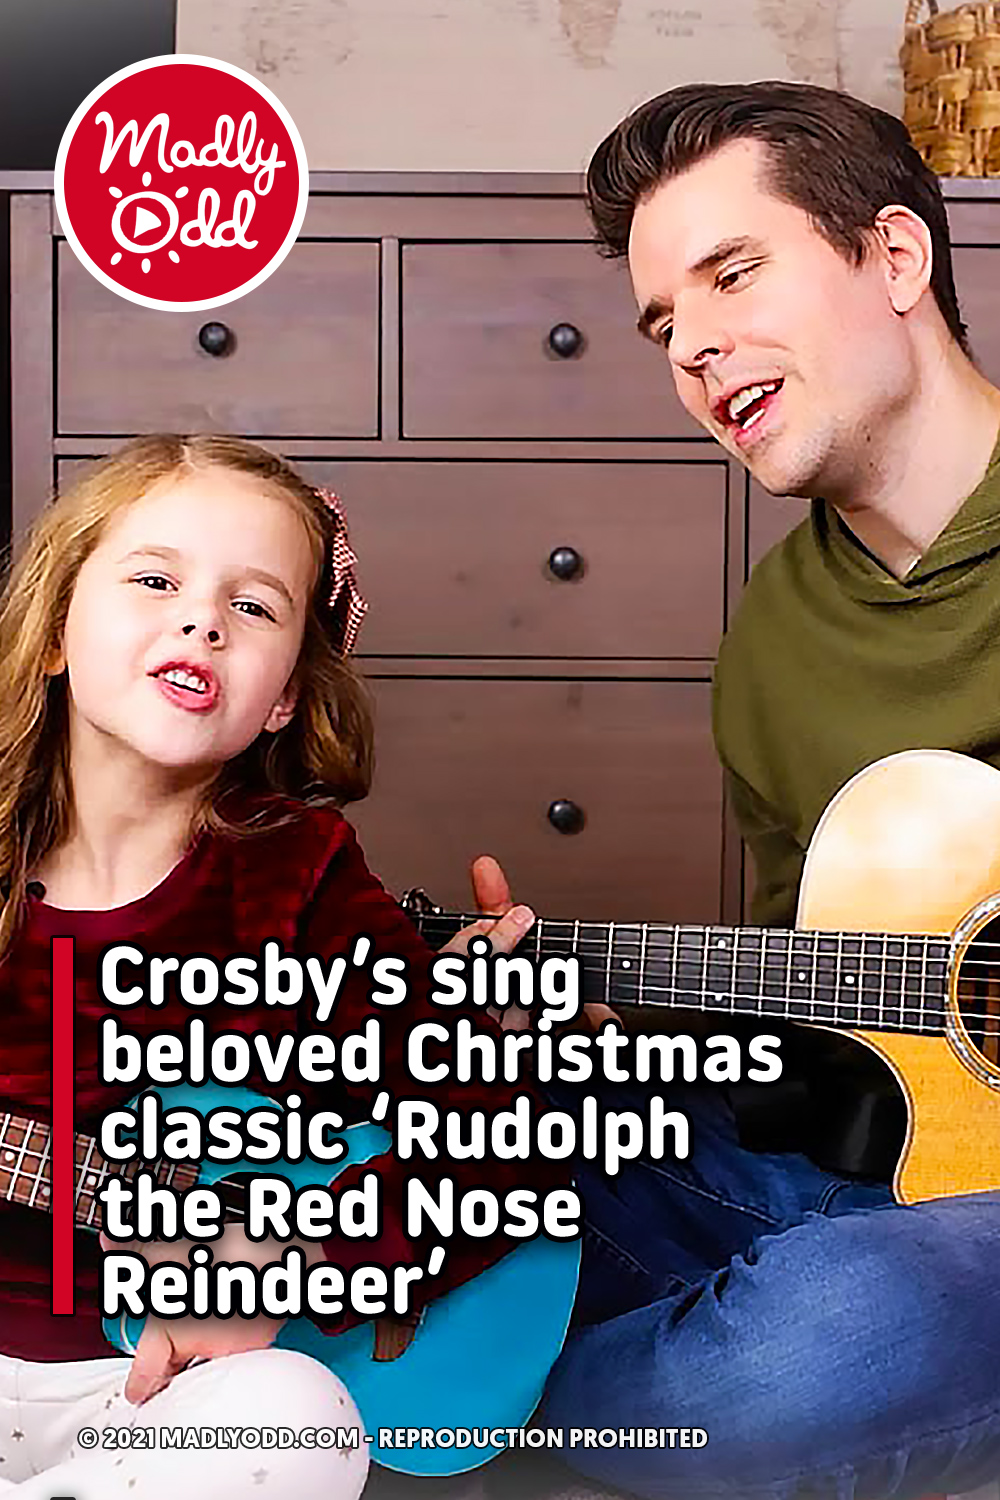 Crosby’s sing beloved Christmas classic ‘Rudolph the Red Nose Reindeer’